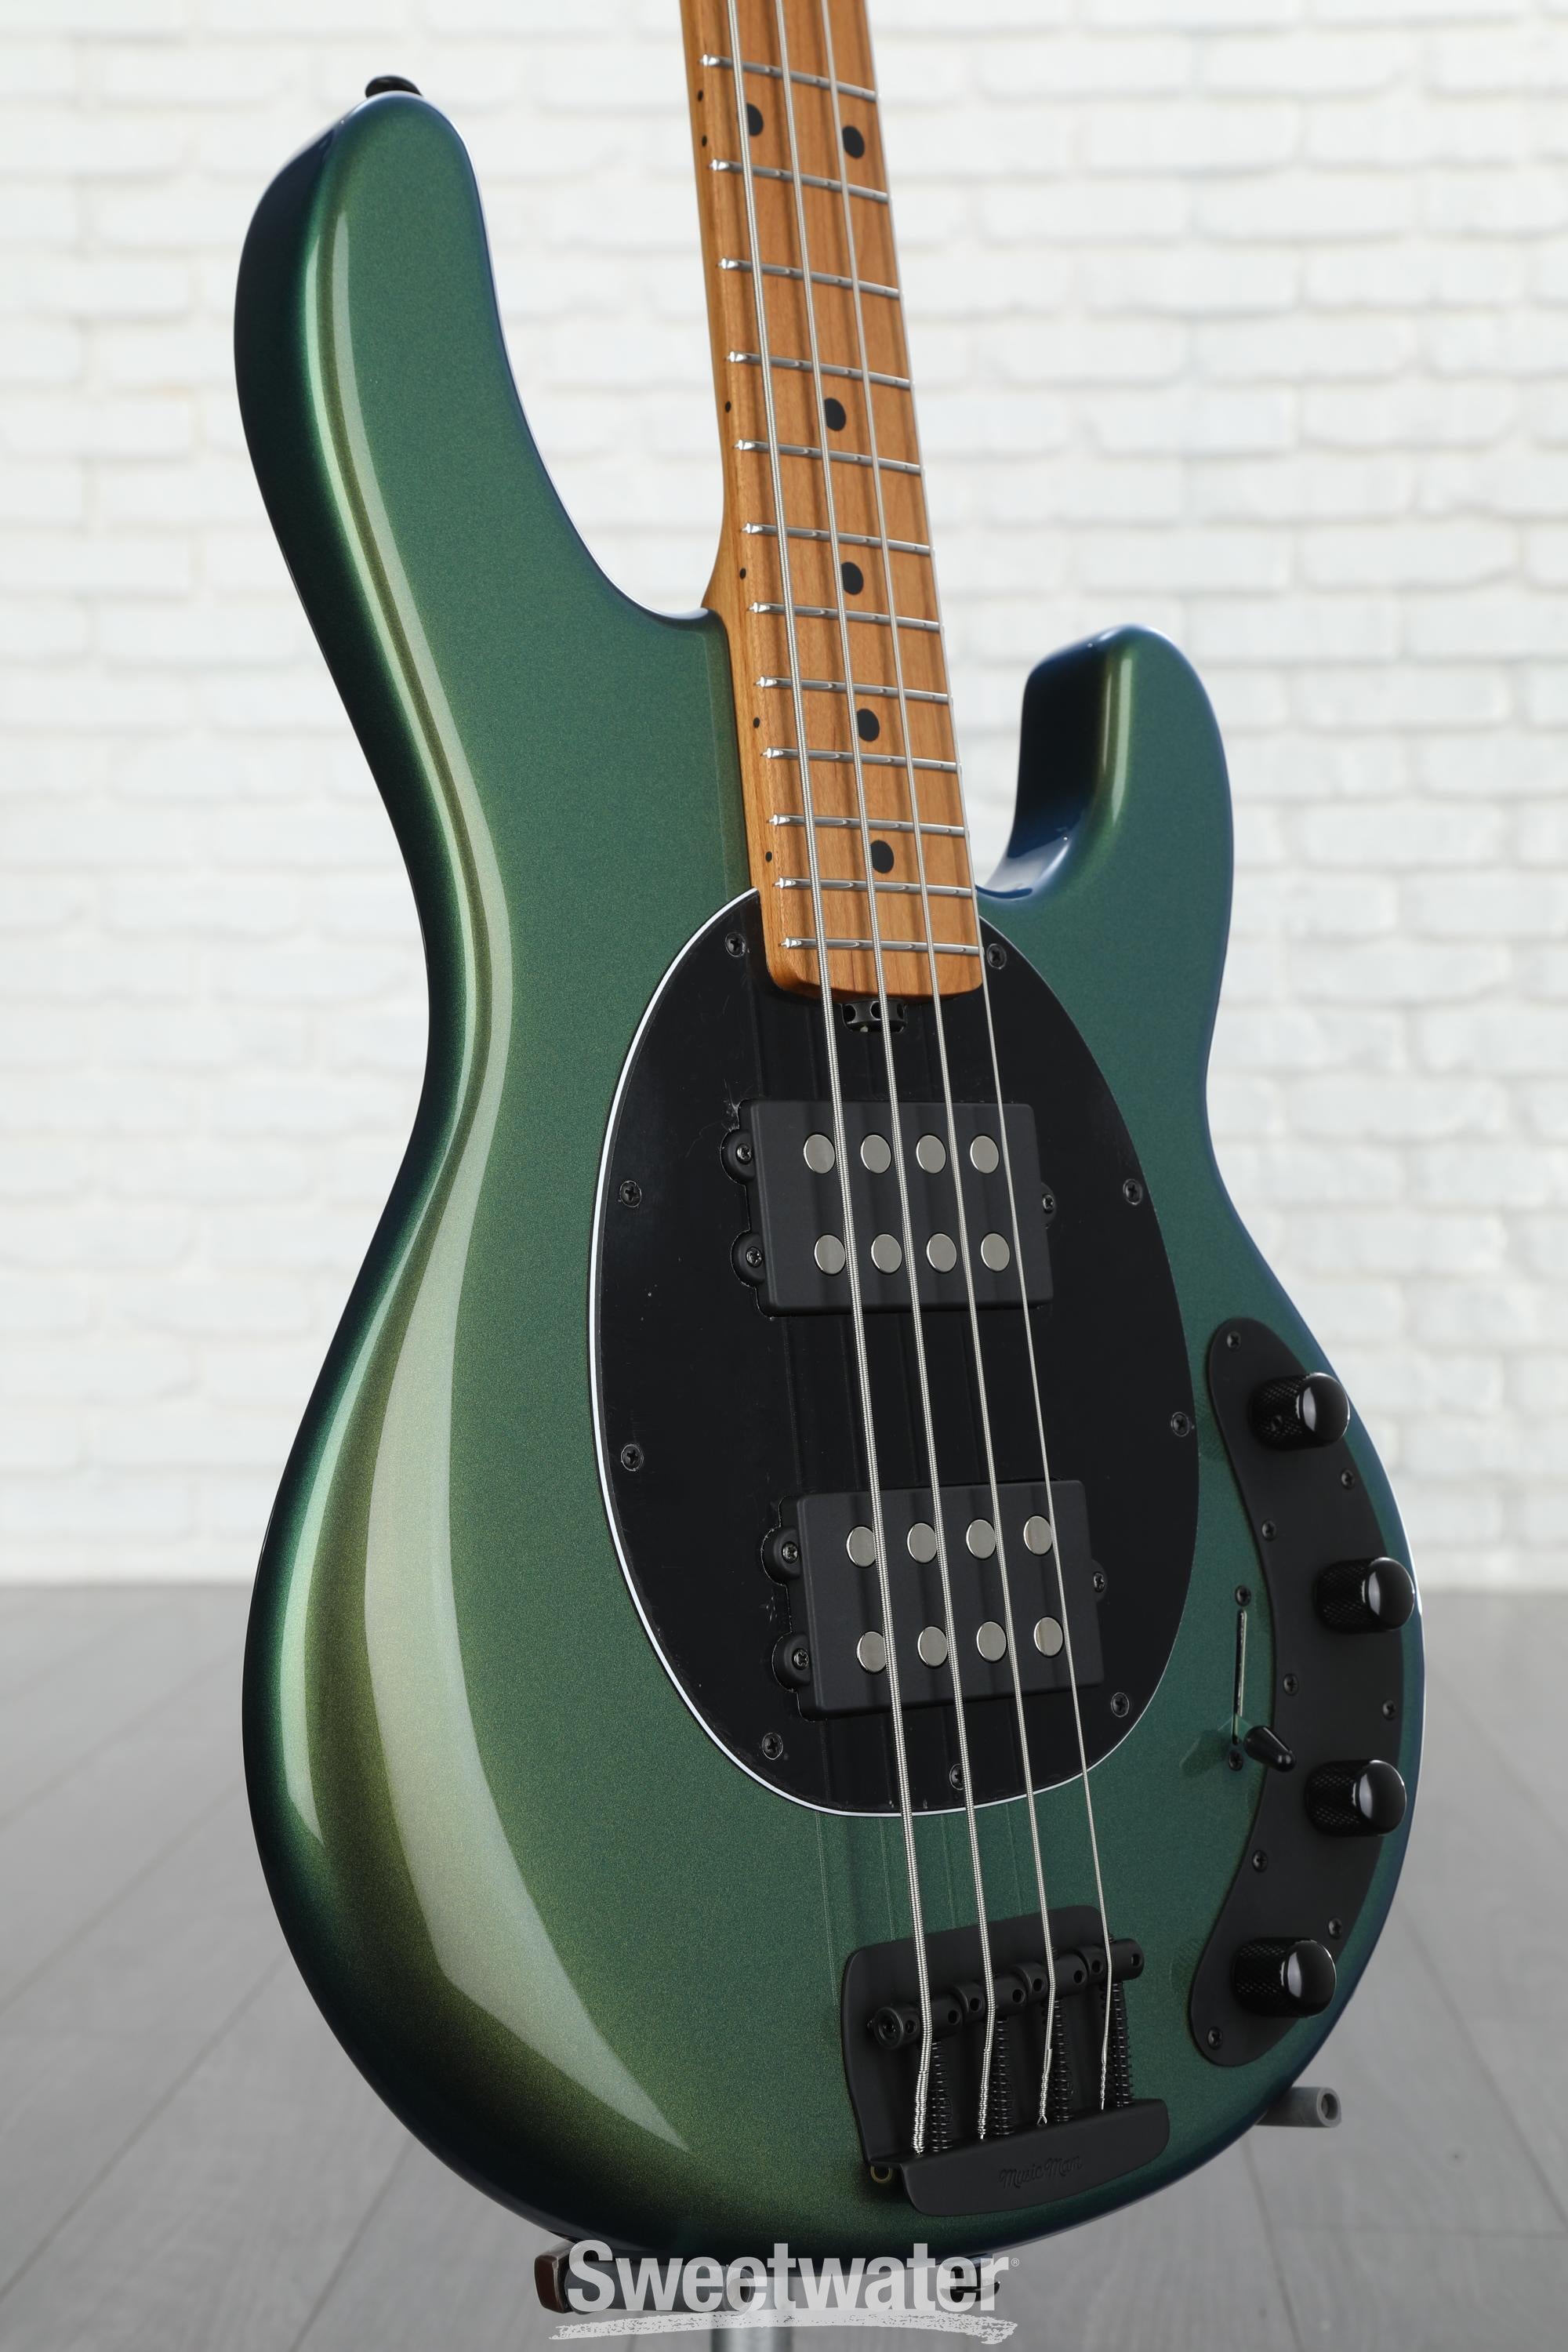 Ernie Ball Music Man StingRay Special HH Bass Guitar - Emerald Iris,  Sweetwater Exclusive